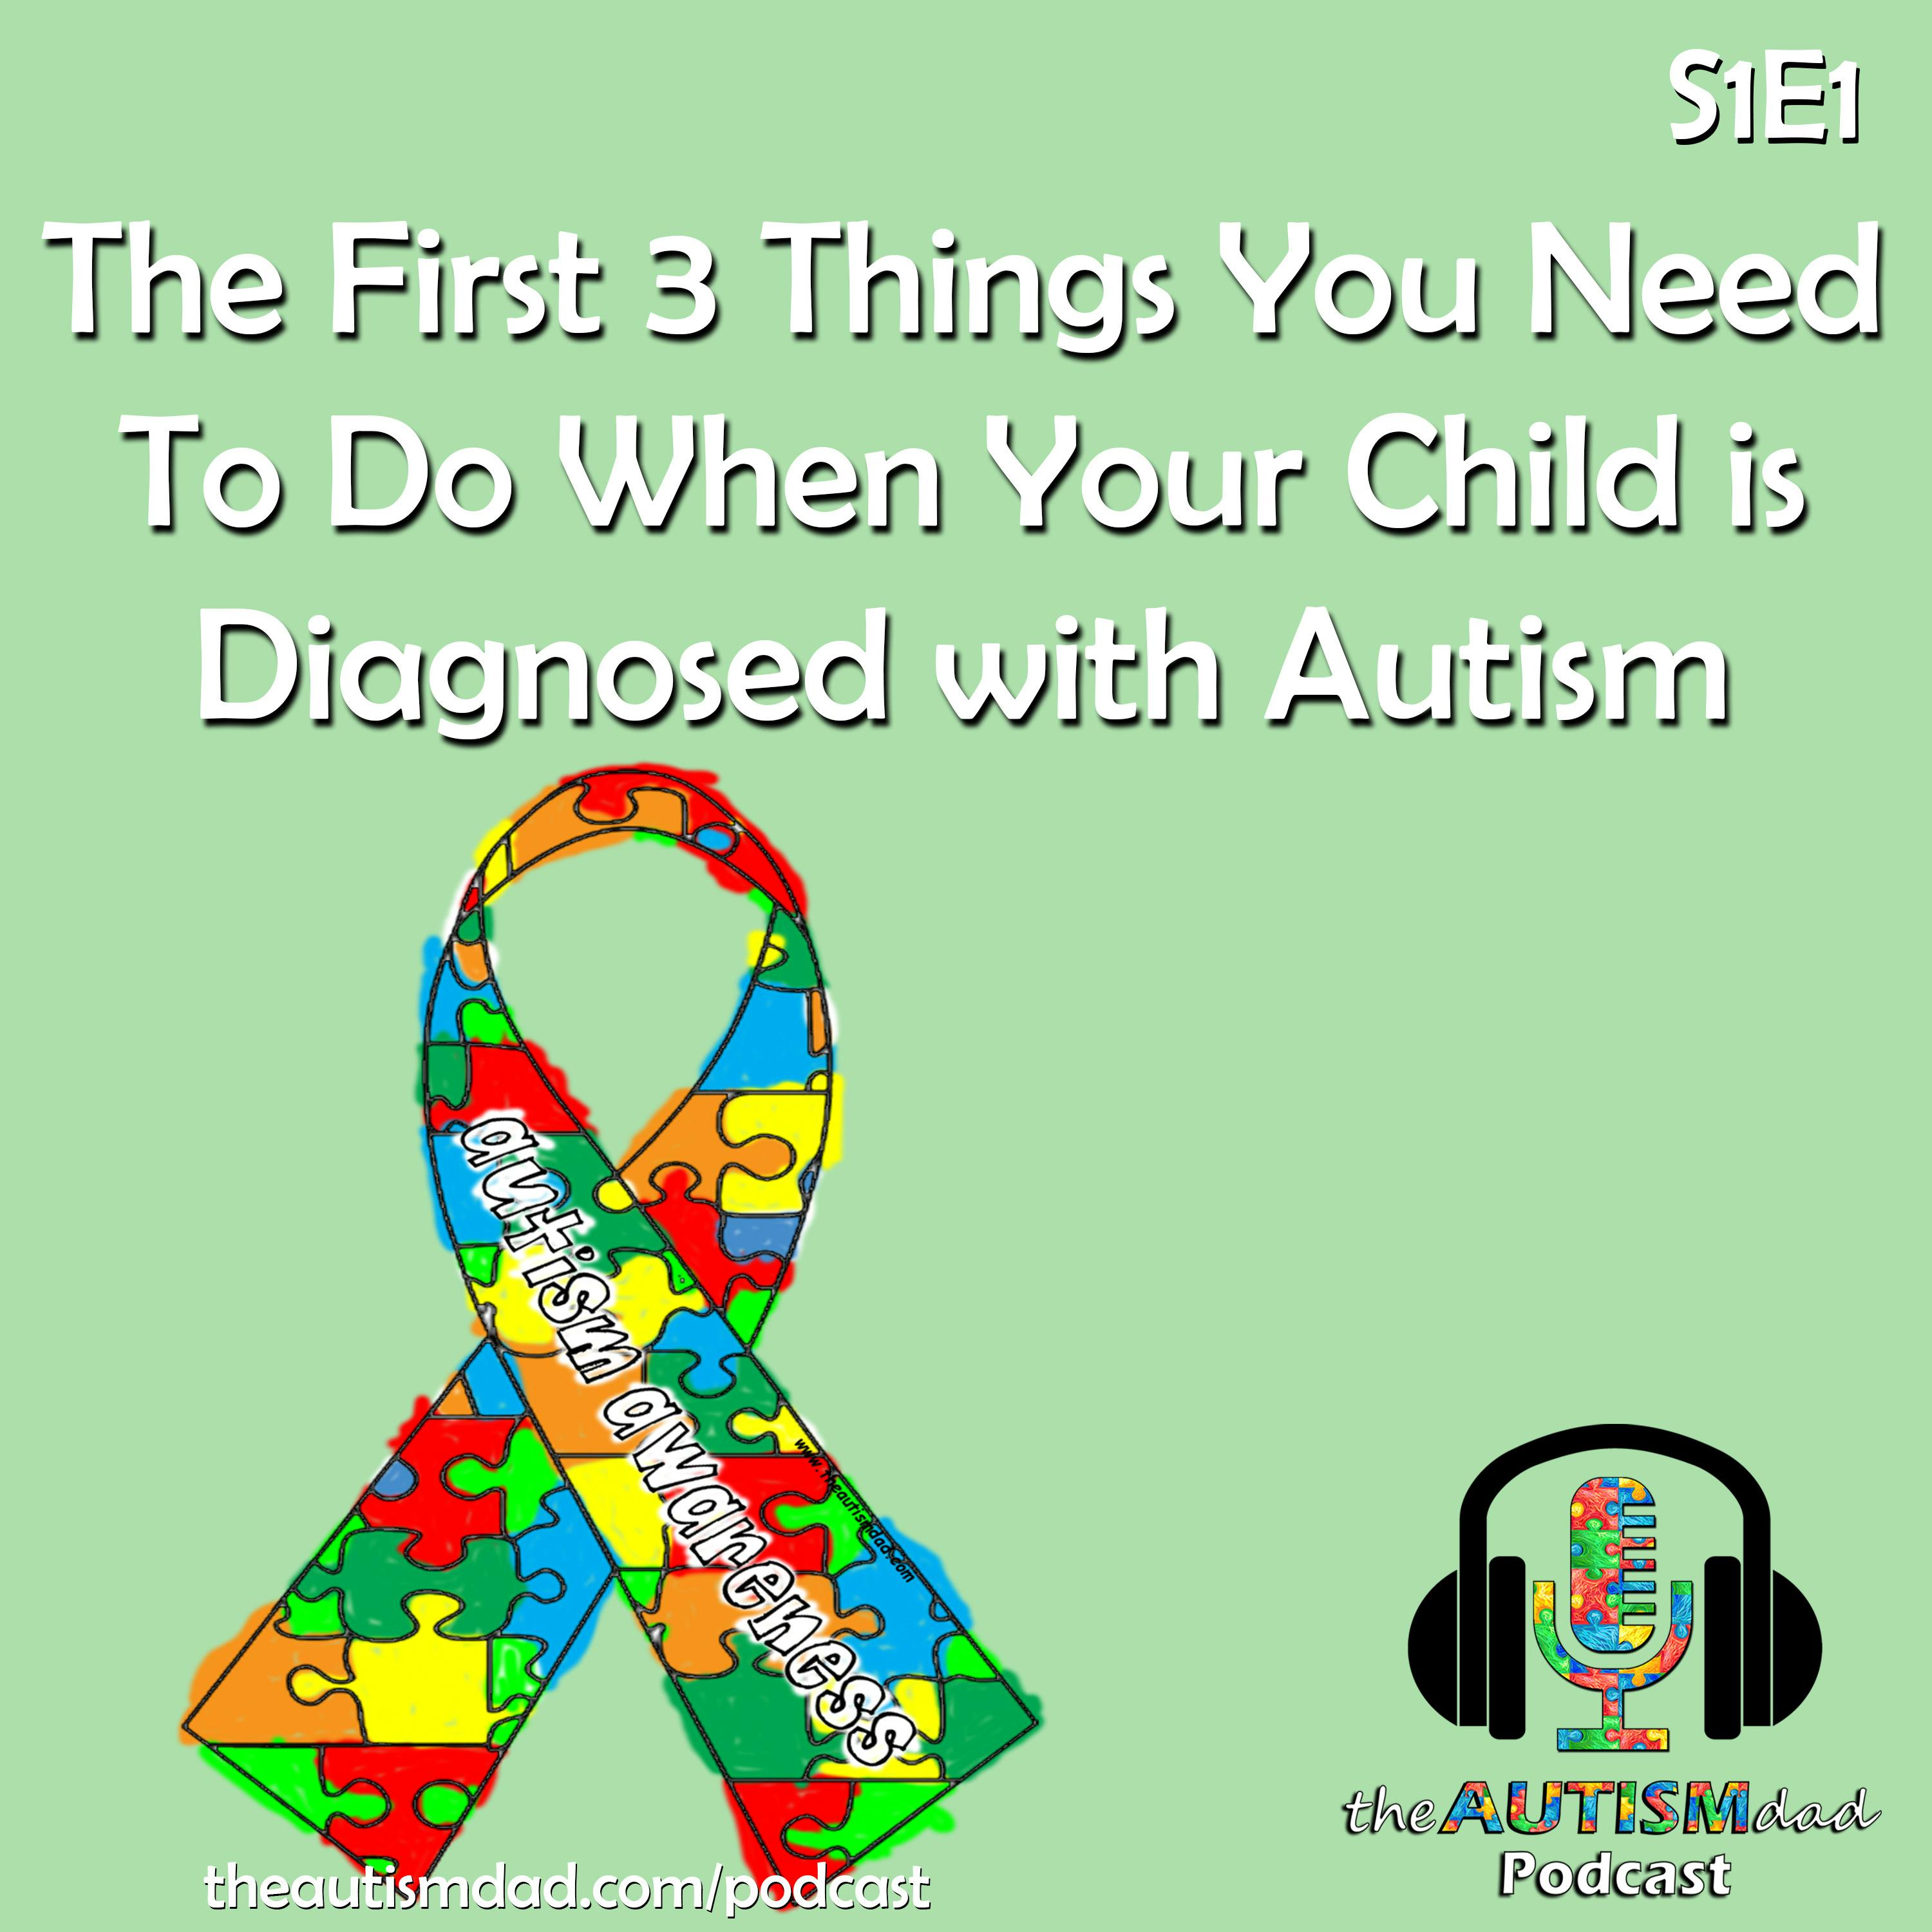 The First 3 Things You Need To Do When Your Child is Diagnosed with Autism